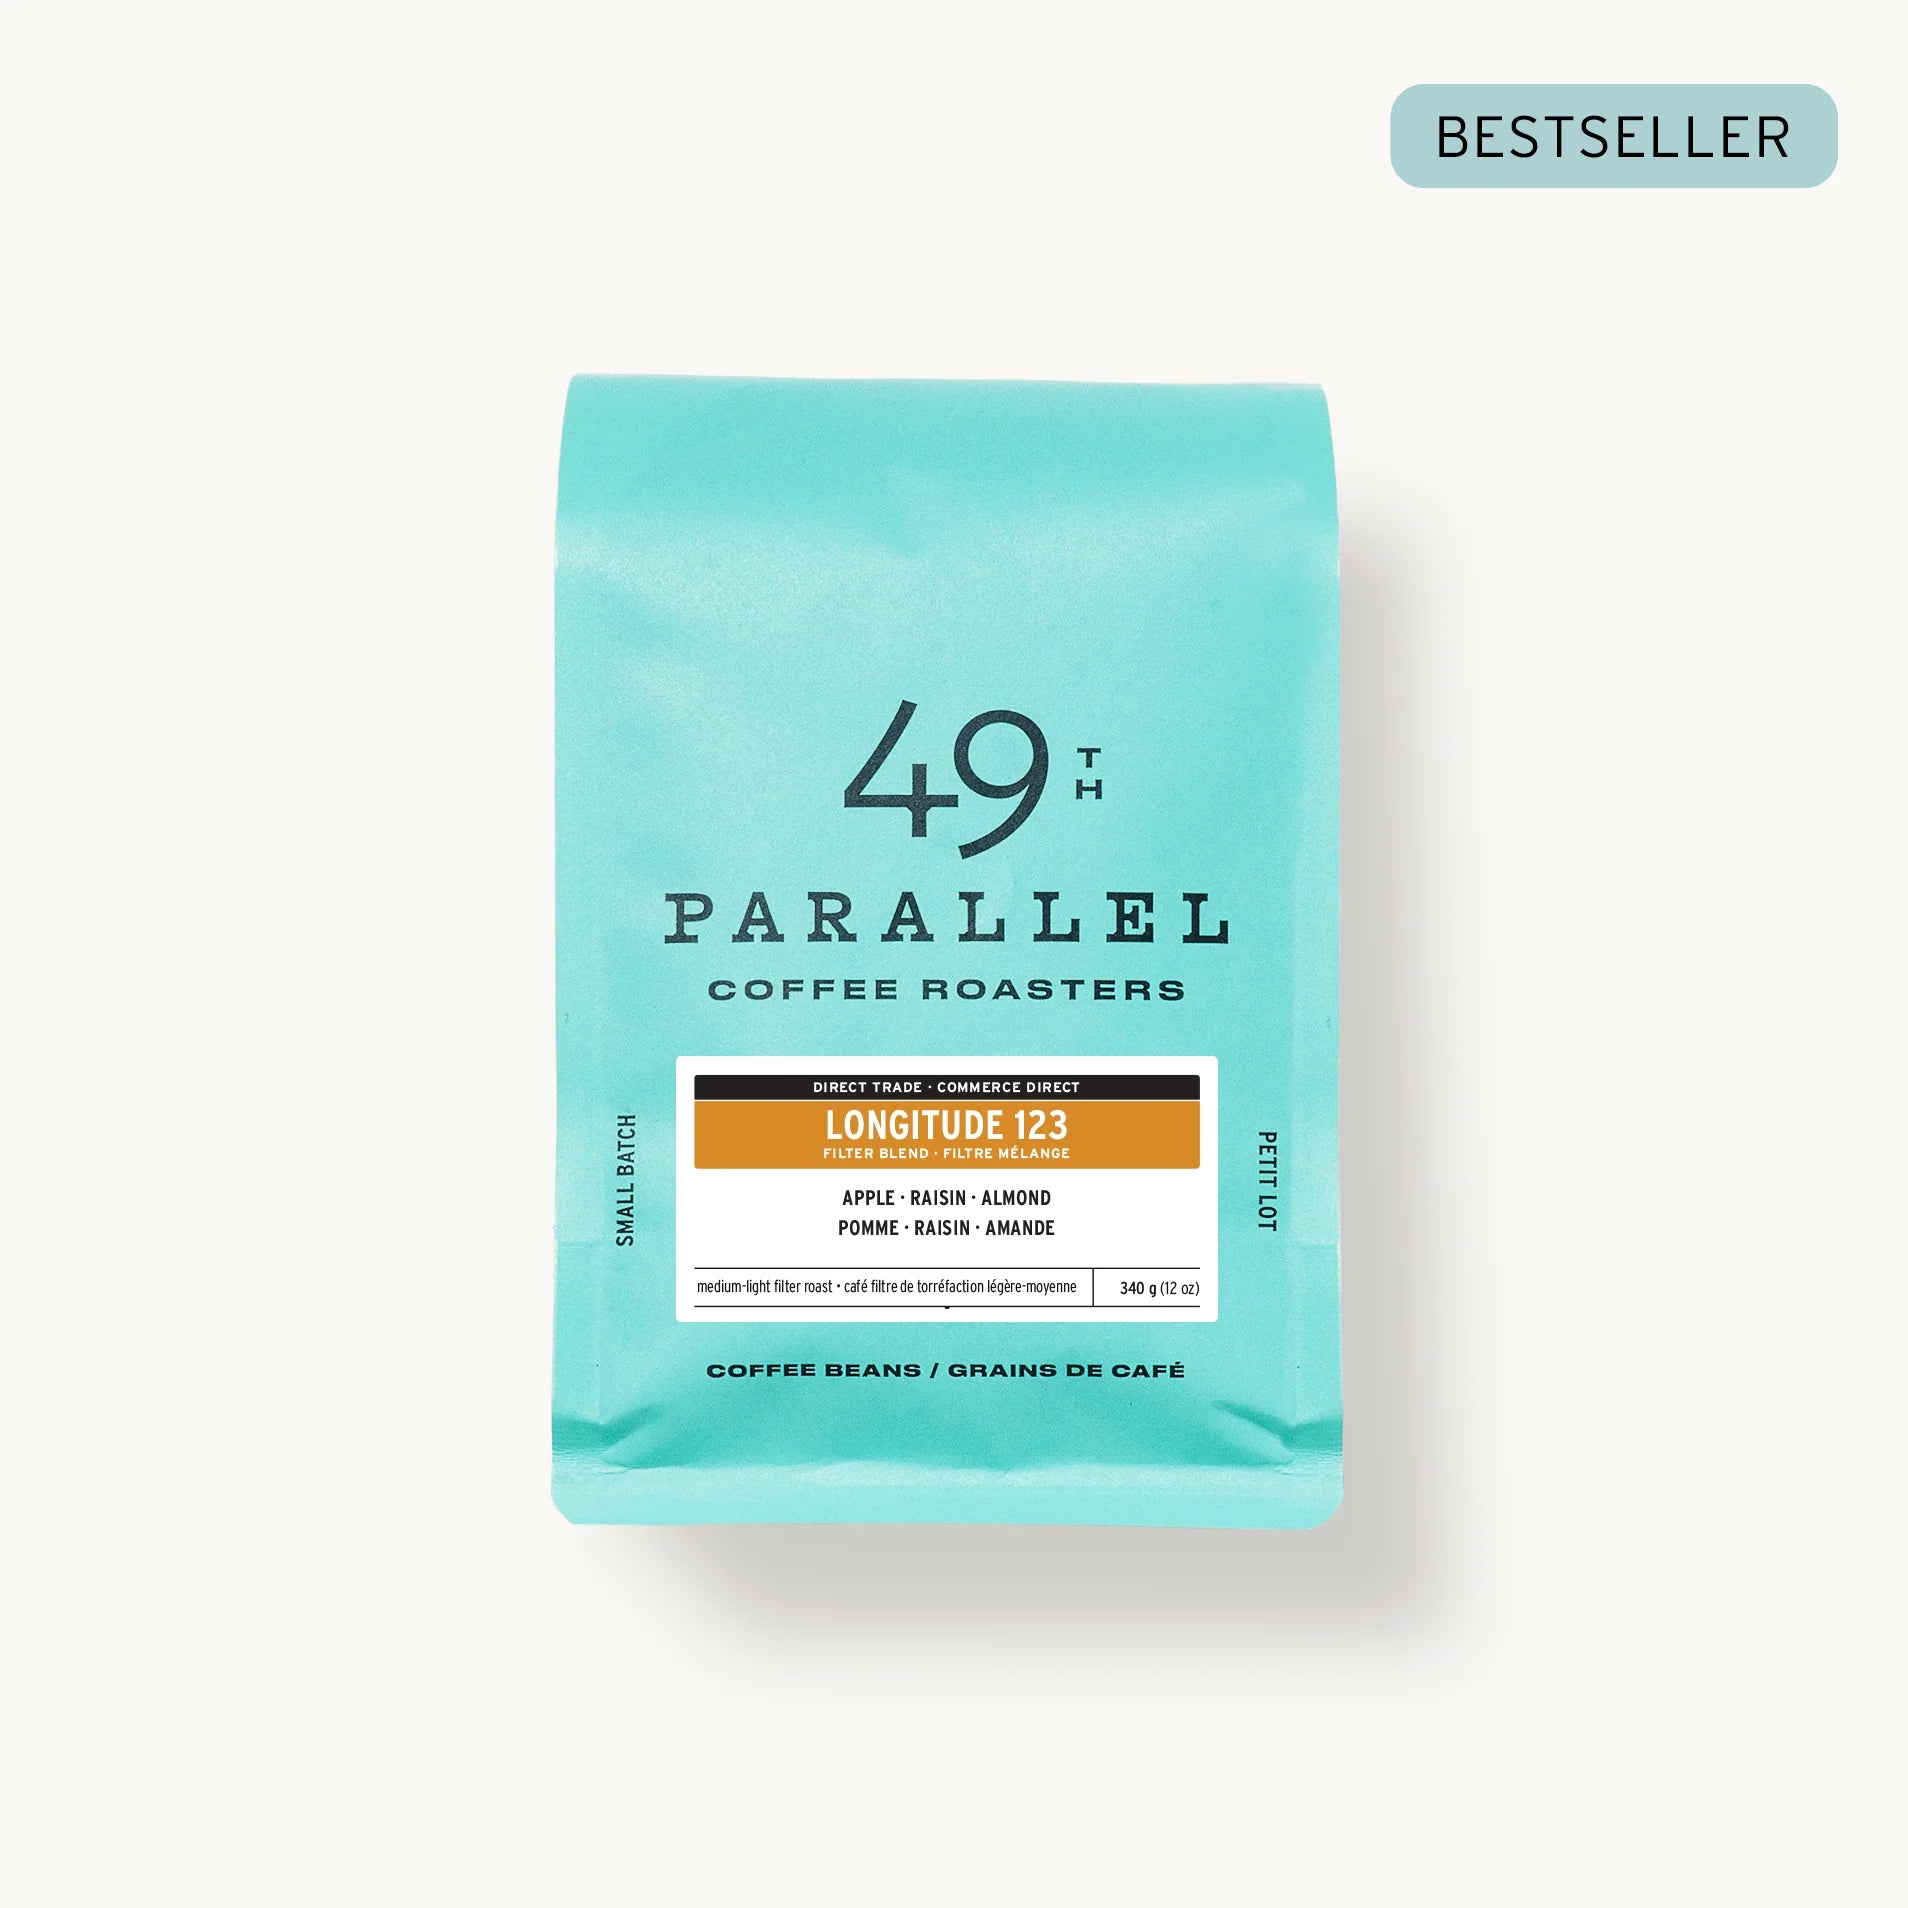 Longitude 123°W Blend by 49th Parallel Coffee Roasters. A medium-light roast with sweet flavors of almond, apple, and raisin. Crafted from the freshest seasonal coffees for a versatile and flavorful experience.